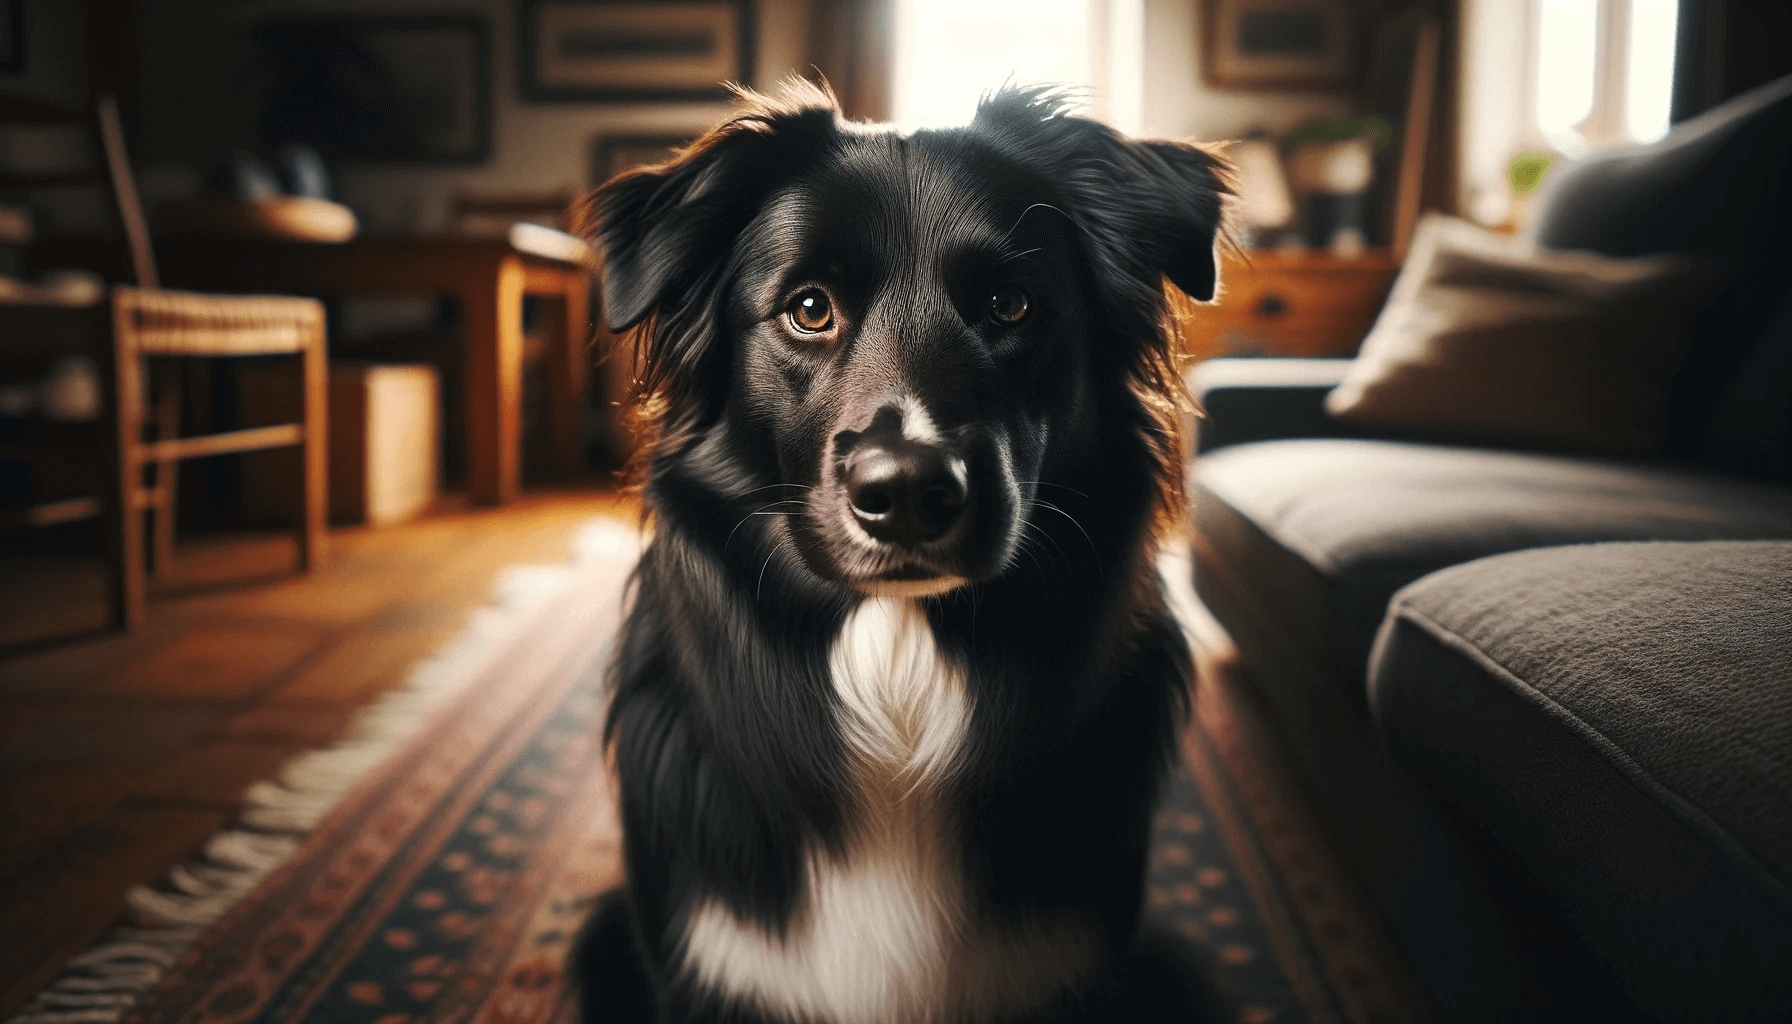 The final Borador Border Collie Lab Mix with a lush dark coat and a white chest.